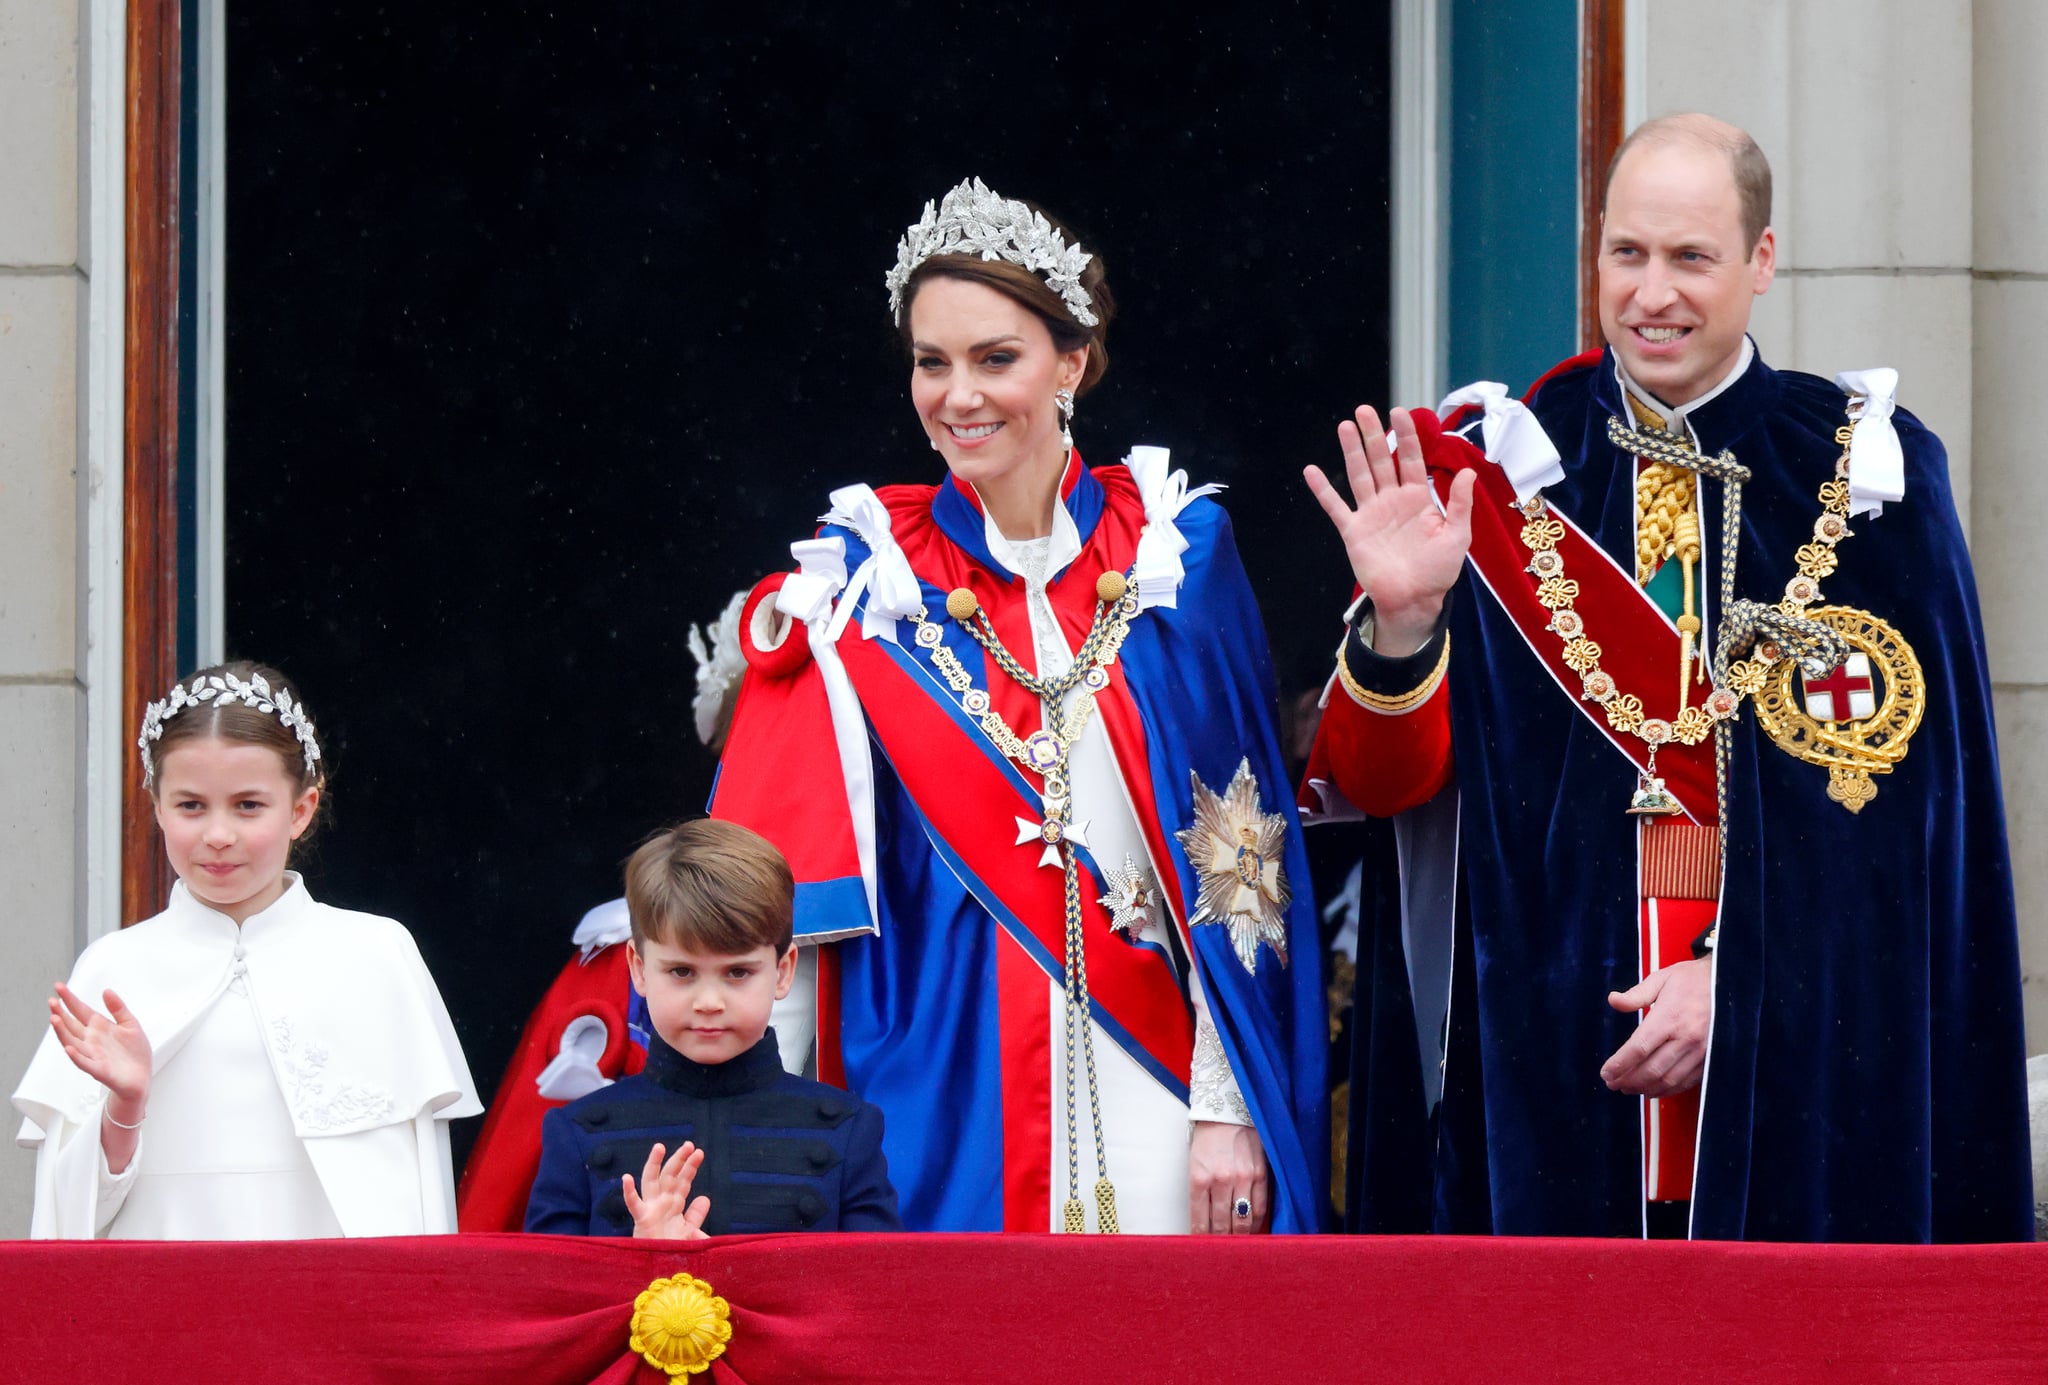 LONDON, UNITED KINGDOM - MAY 06: (EMBARGOED FOR PUBLICATION IN UK NEWSPAPERS UNTIL 24 HOURS AFTER CREATE DATE AND TIME) Princess Charlotte of Wales, Prince Louis of Wales, Catherine, Princess of Wales (wearing the Mantle of the Royal Victorian Order) and Prince William, Prince of Wales (wearing the Mantle of the Order of the Garter) watch an RAF flypast from the balcony of Buckingham Palace following the Coronation of King Charles III & Queen Camilla at Westminster Abbey on May 6, 2023 in London, England. The Coronation of Charles III and his wife, Camilla, as King and Queen of the United Kingdom of Great Britain and Northern Ireland, and the other Commonwealth realms takes place at Westminster Abbey today. Charles acceded to the throne on 8 September 2022, upon the death of his mother, Elizabeth II. (Photo by Max Mumby/Indigo/Getty Images)